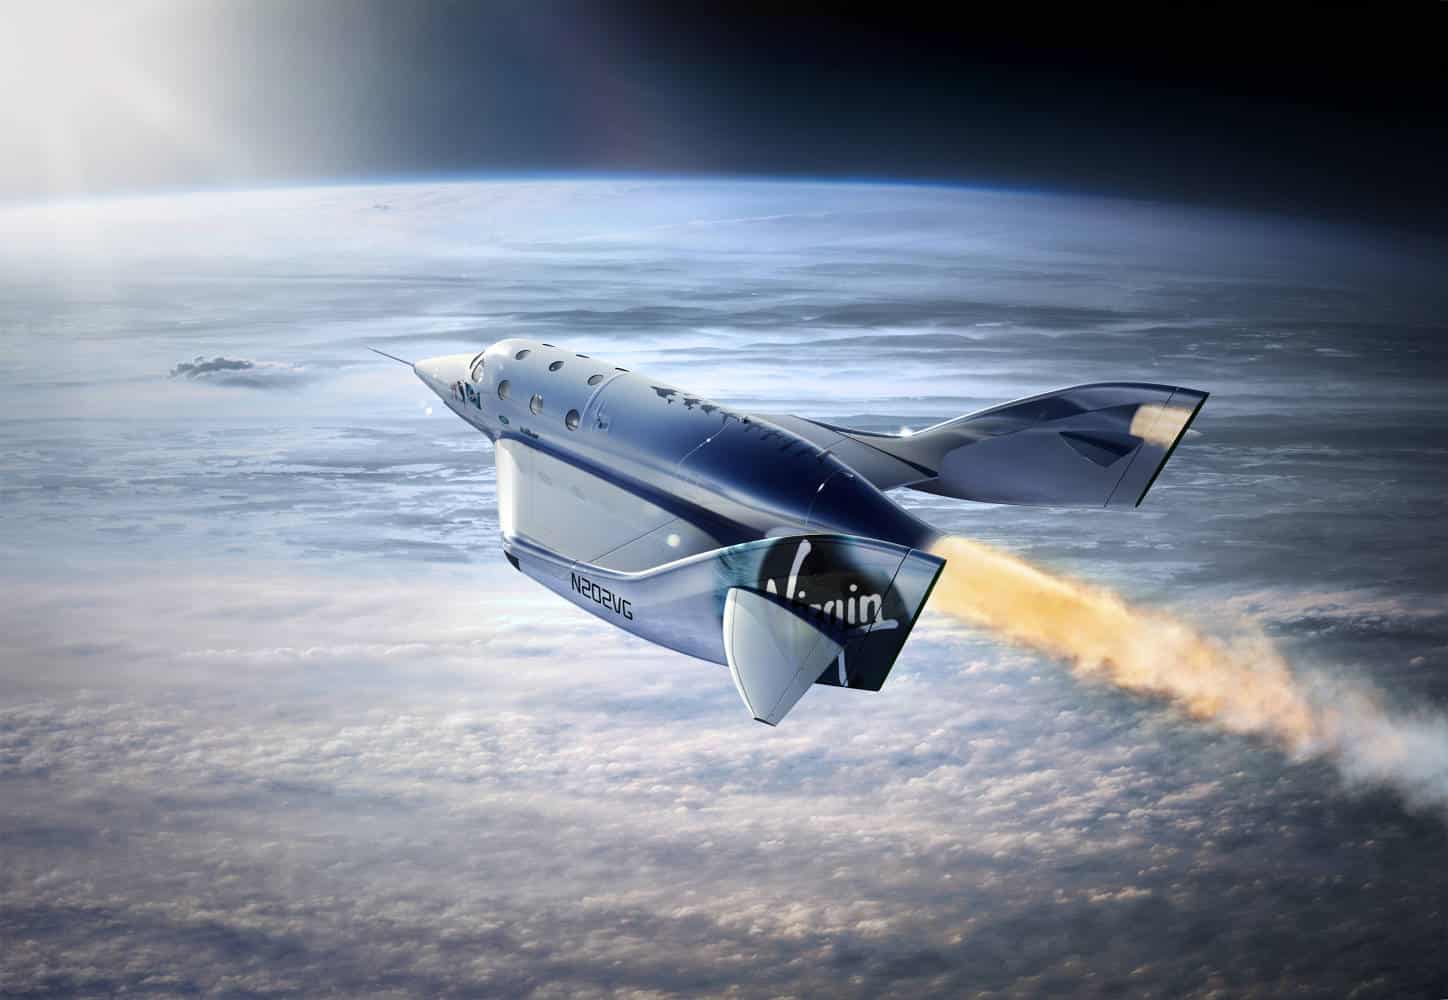 VIRGIN GALACTIC AIMS TO MAKE COMMERCIAL FLIGHTS INTO SPACE